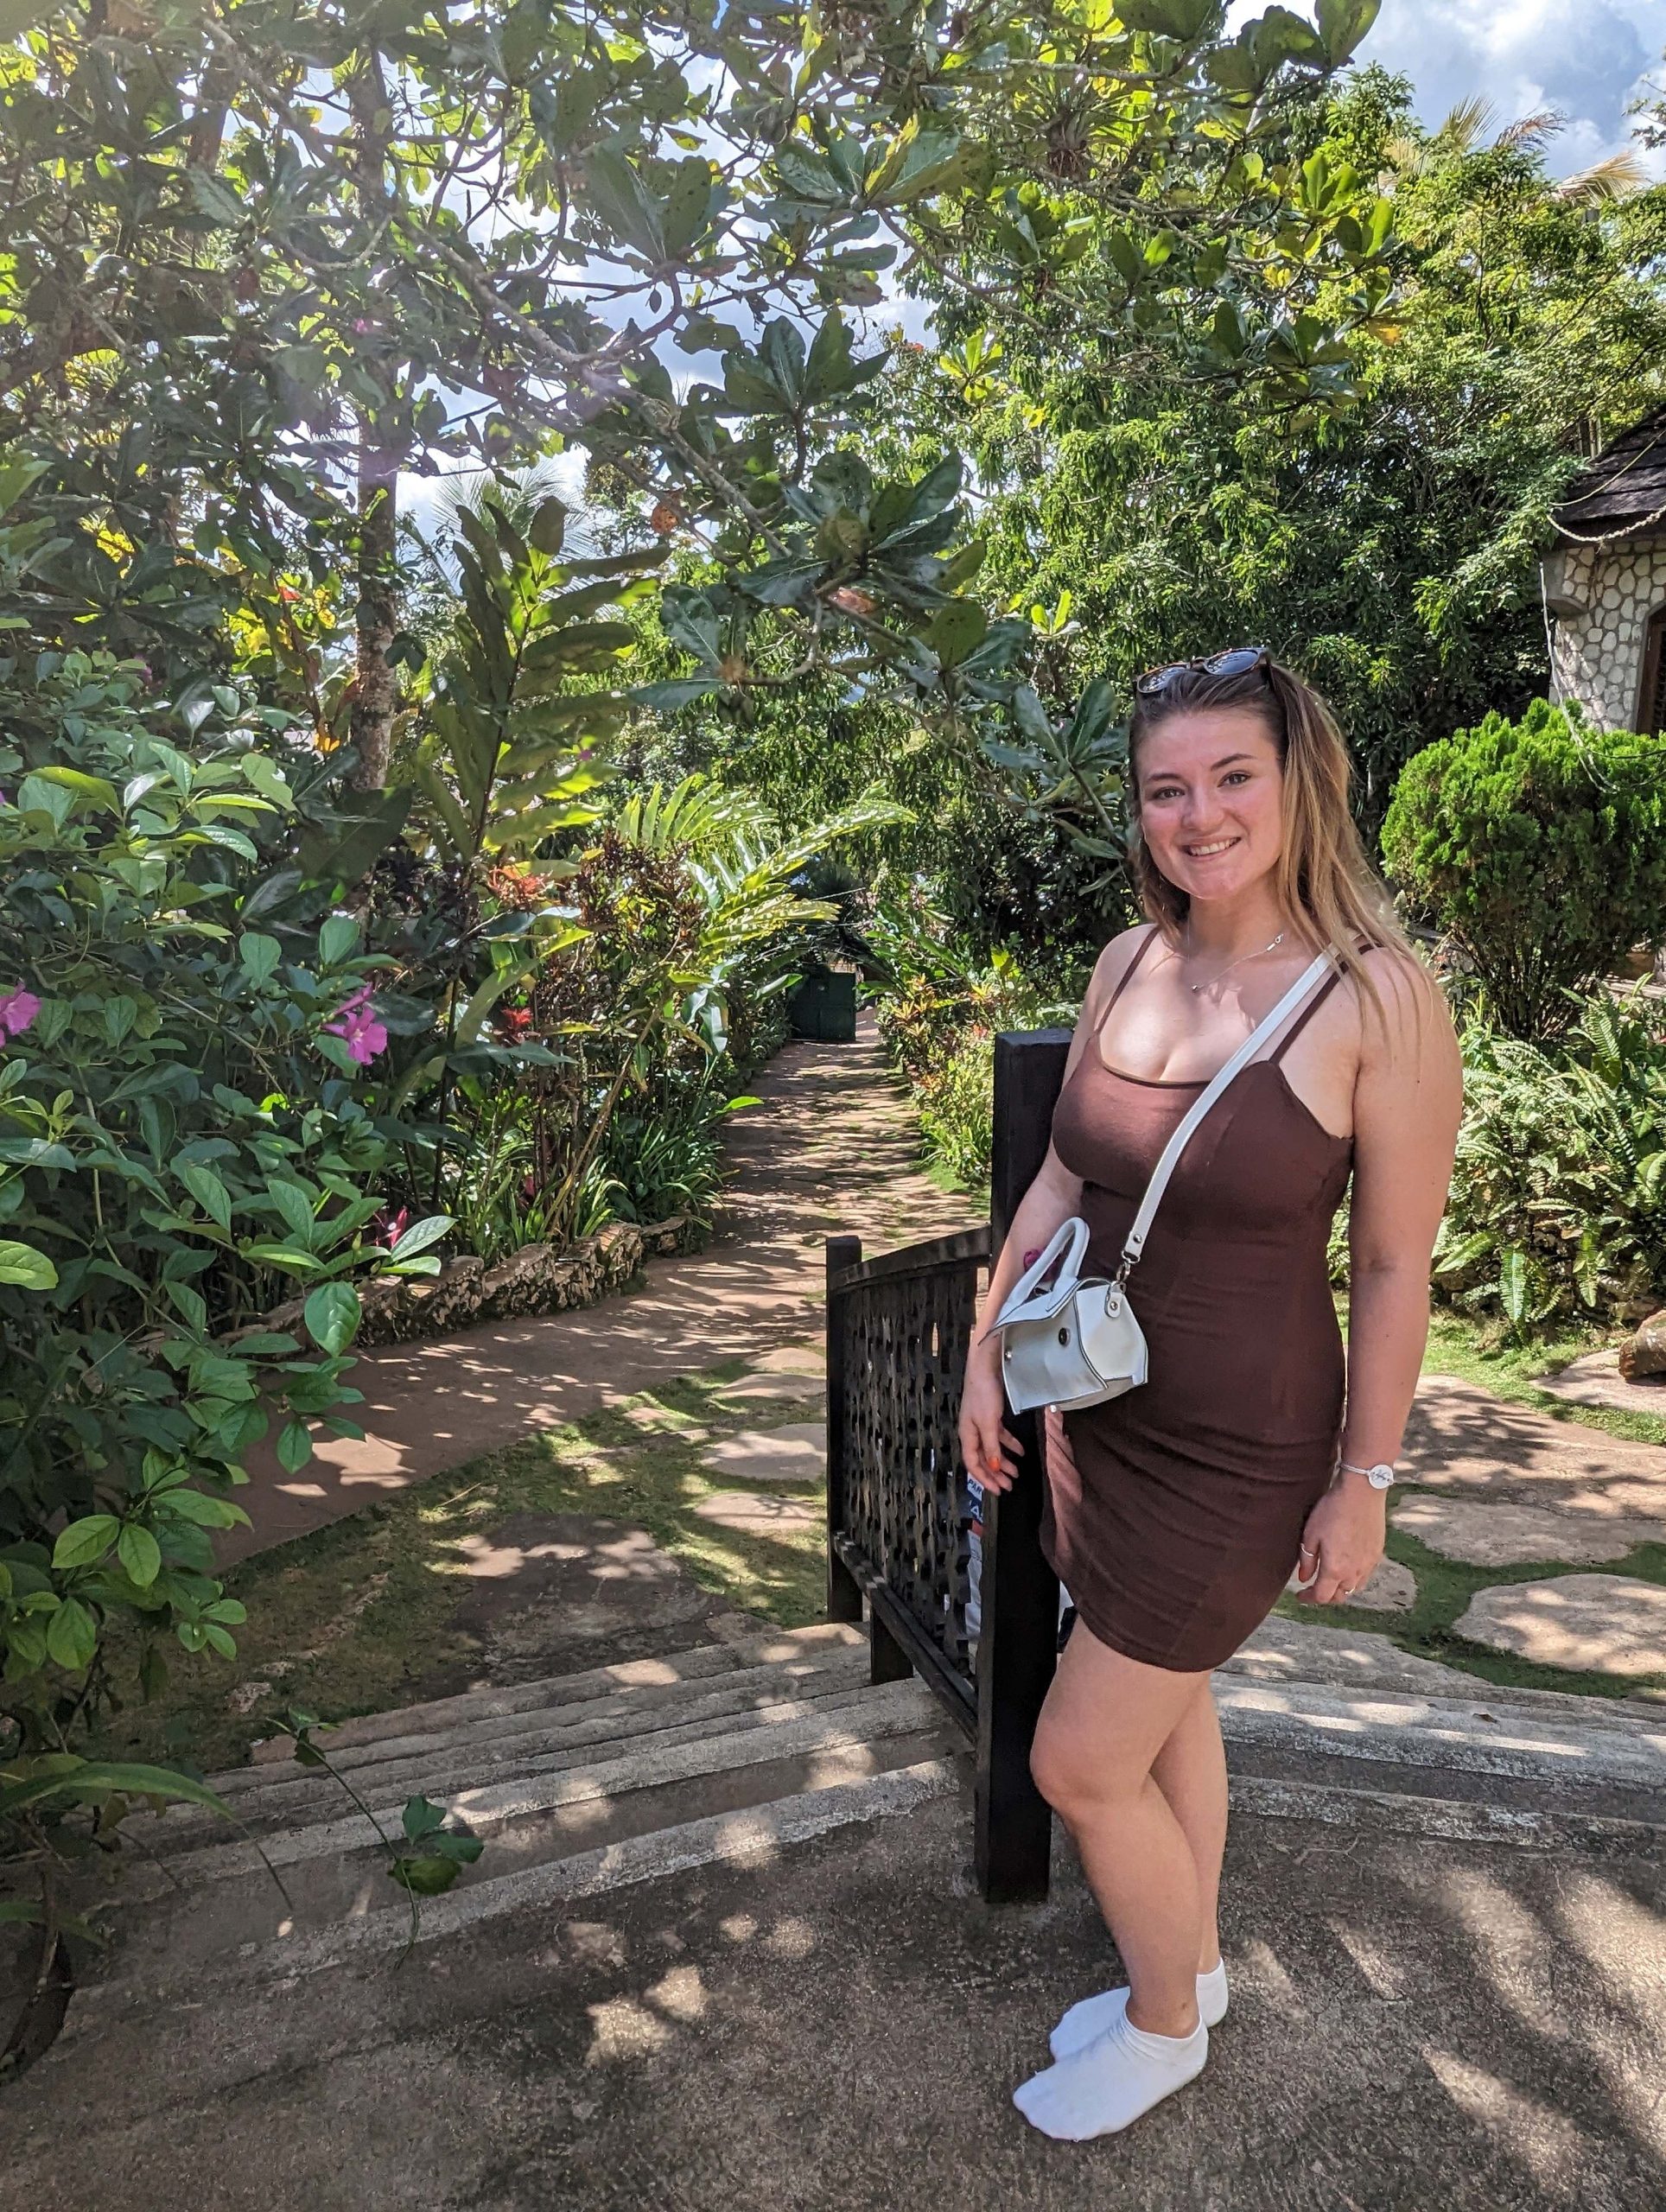 Belle during a holiday to Jamaica in 2022. She is wearing a brown sundress and is standing at the entrance of a pathway, surrounded by green trees and shrubs.